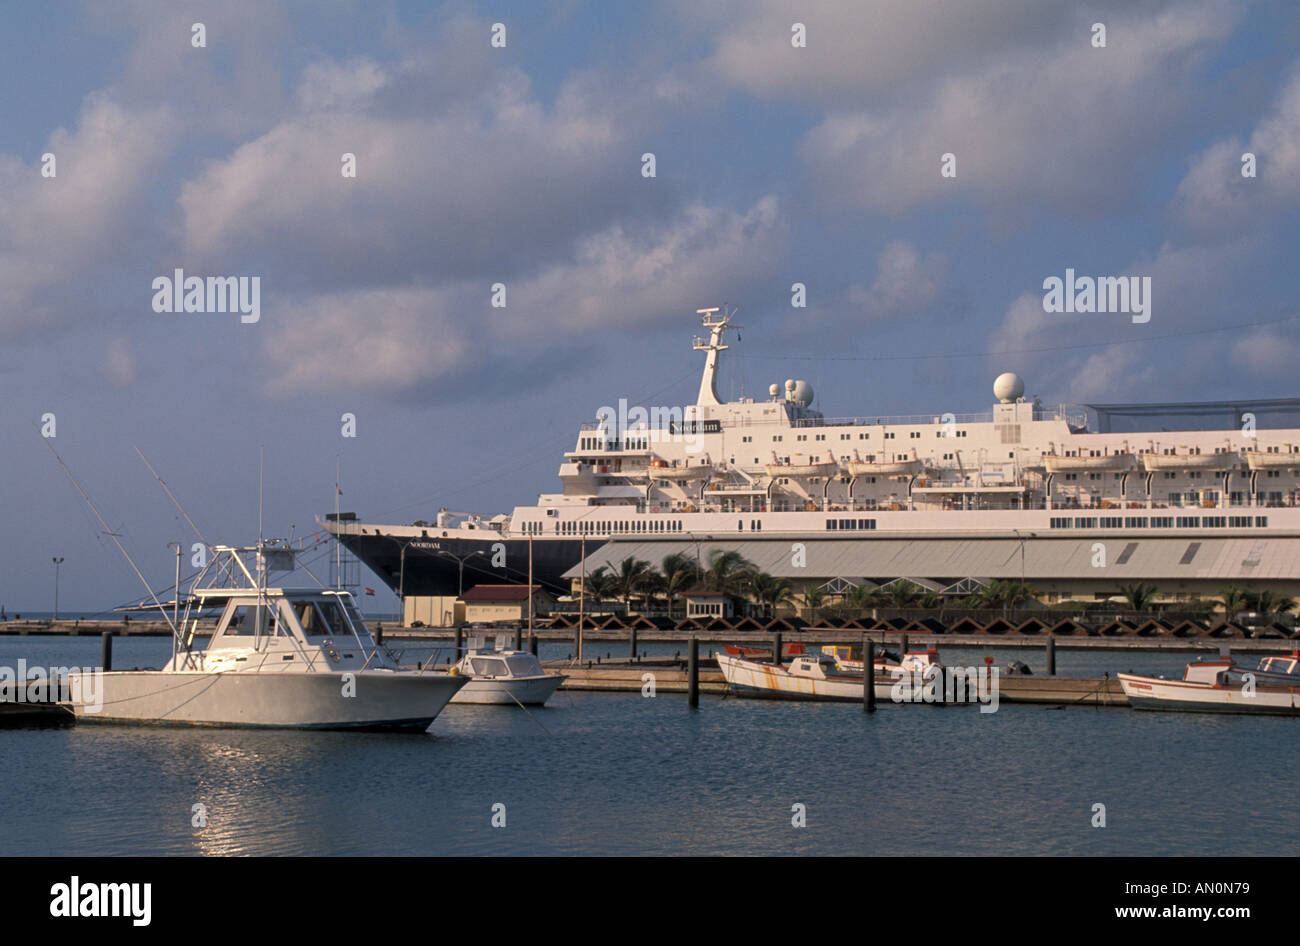 Cruise Ship docked in Oranjestad Aruba small local fishing boats in the foreground Stock Photo